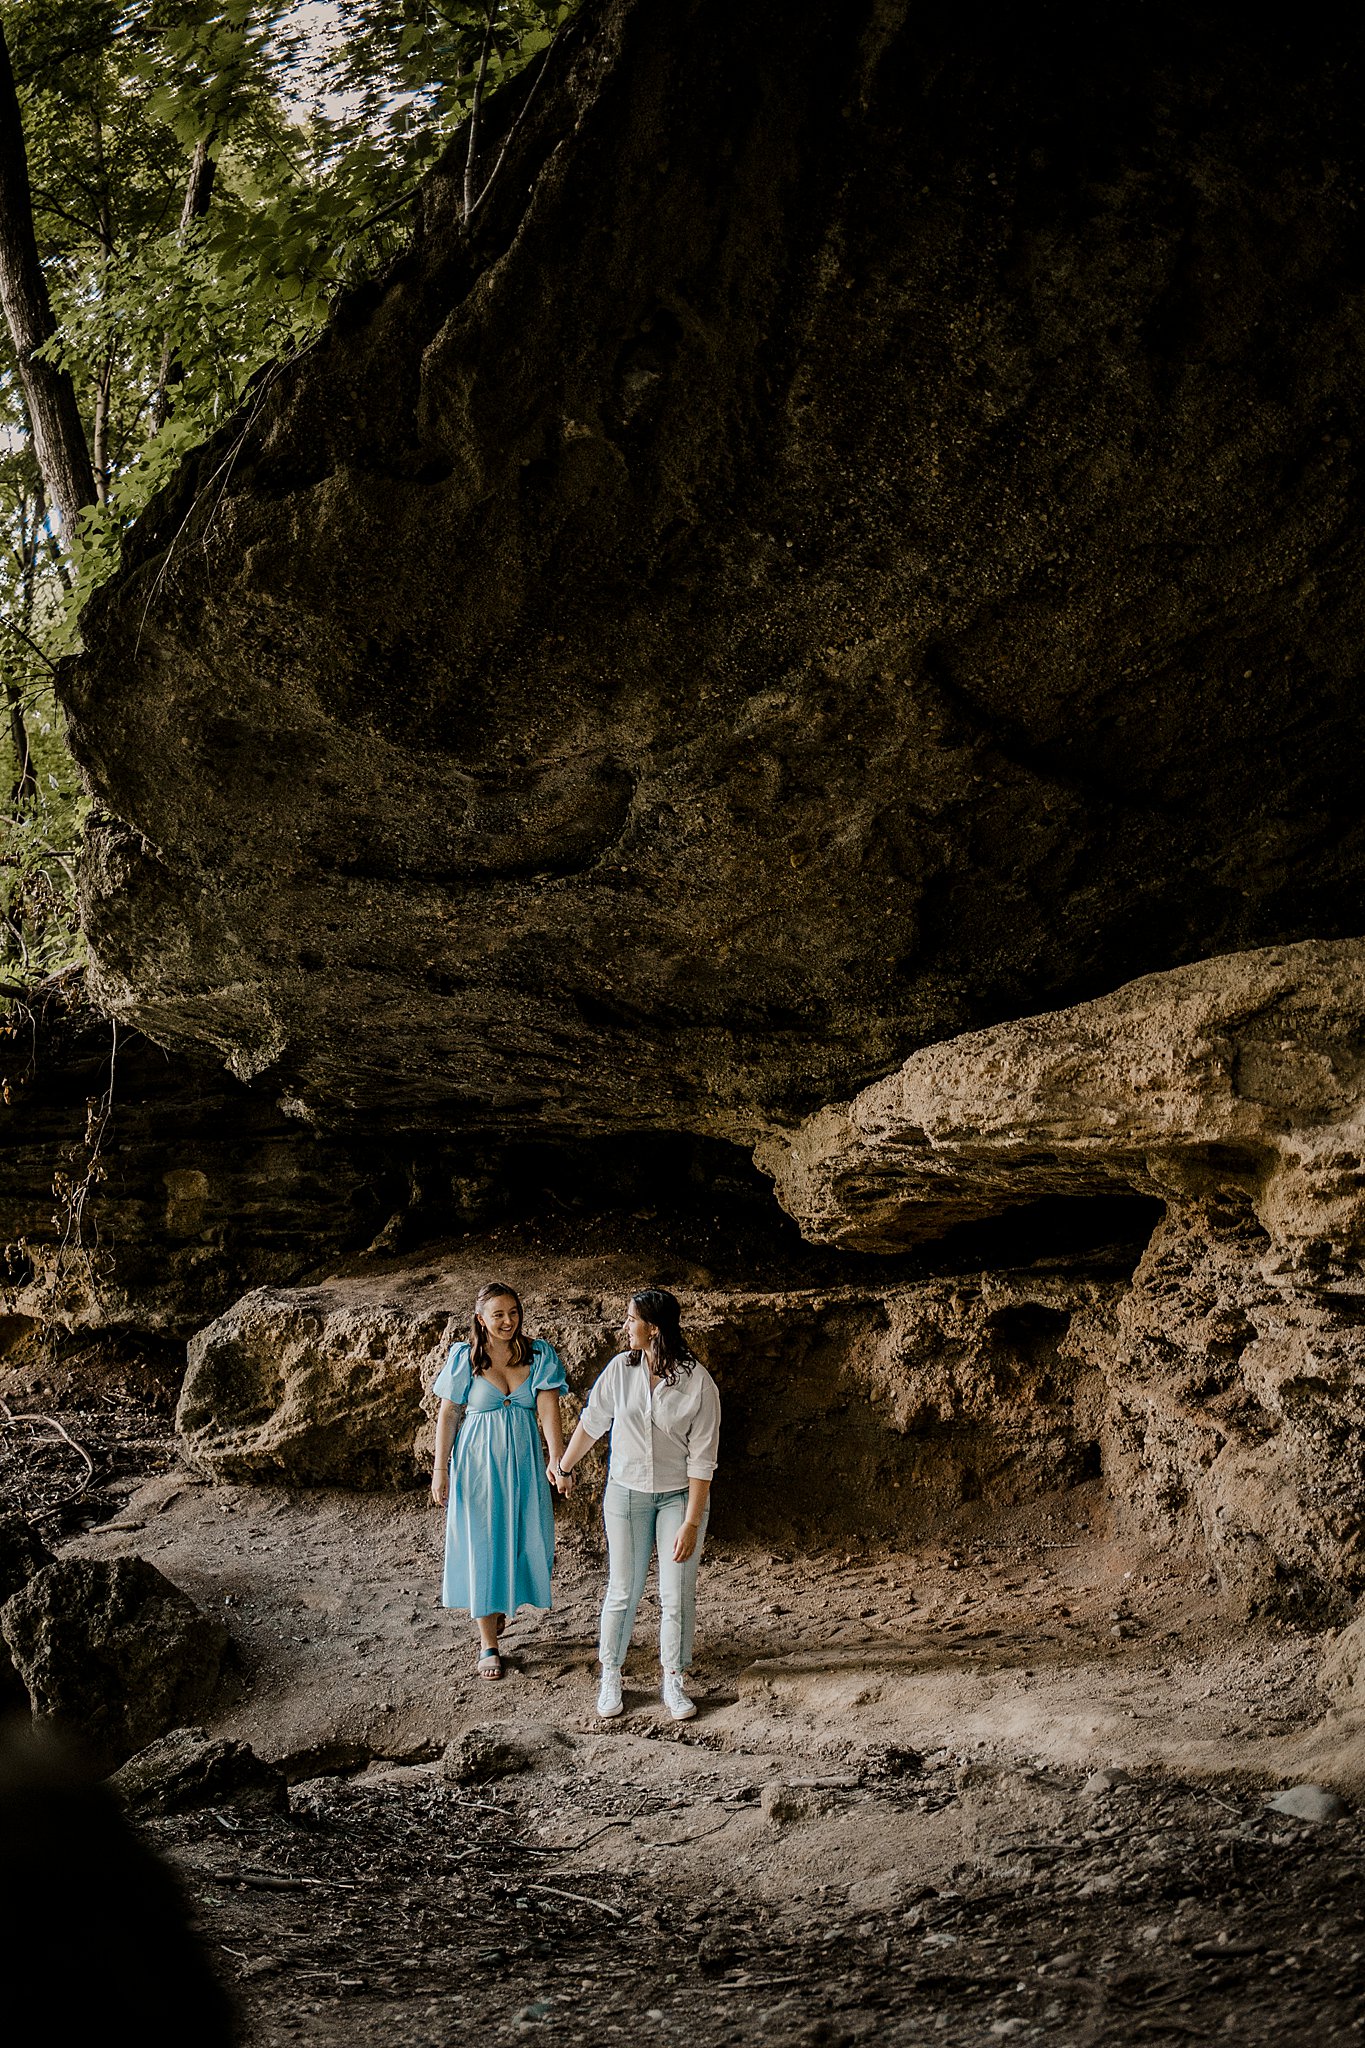 Samantha Mitchell, an LGBTQ Engagement photographer captures two women at Prophet's Rock in Indiana. The two women are snuggling together amongst large rocks. They are laughing and smiling at one another.